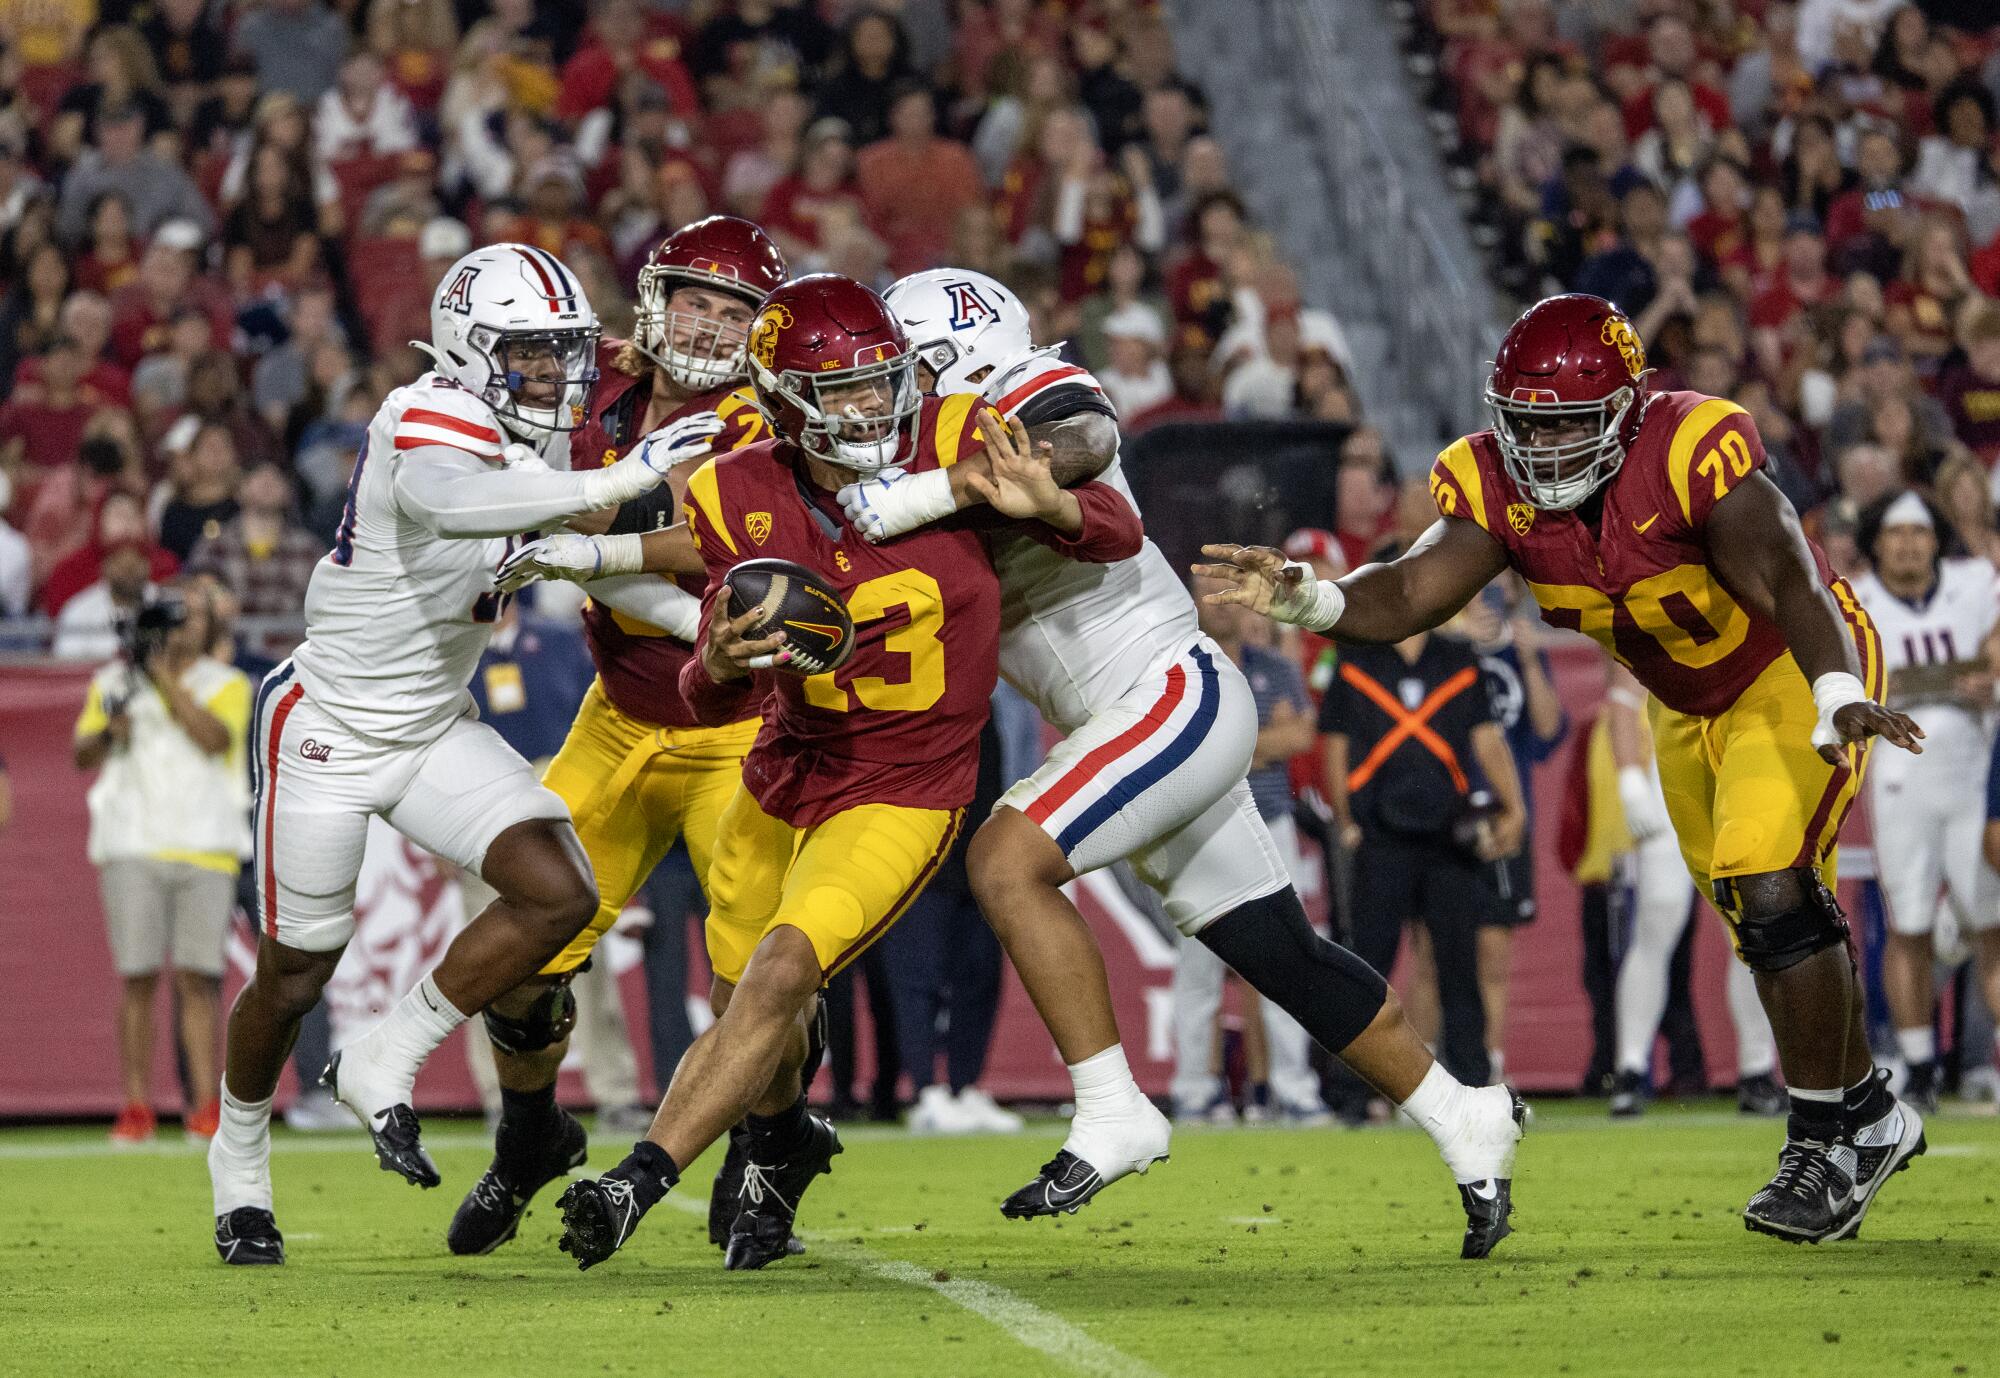 USC's Caleb Williams is sacked while running.